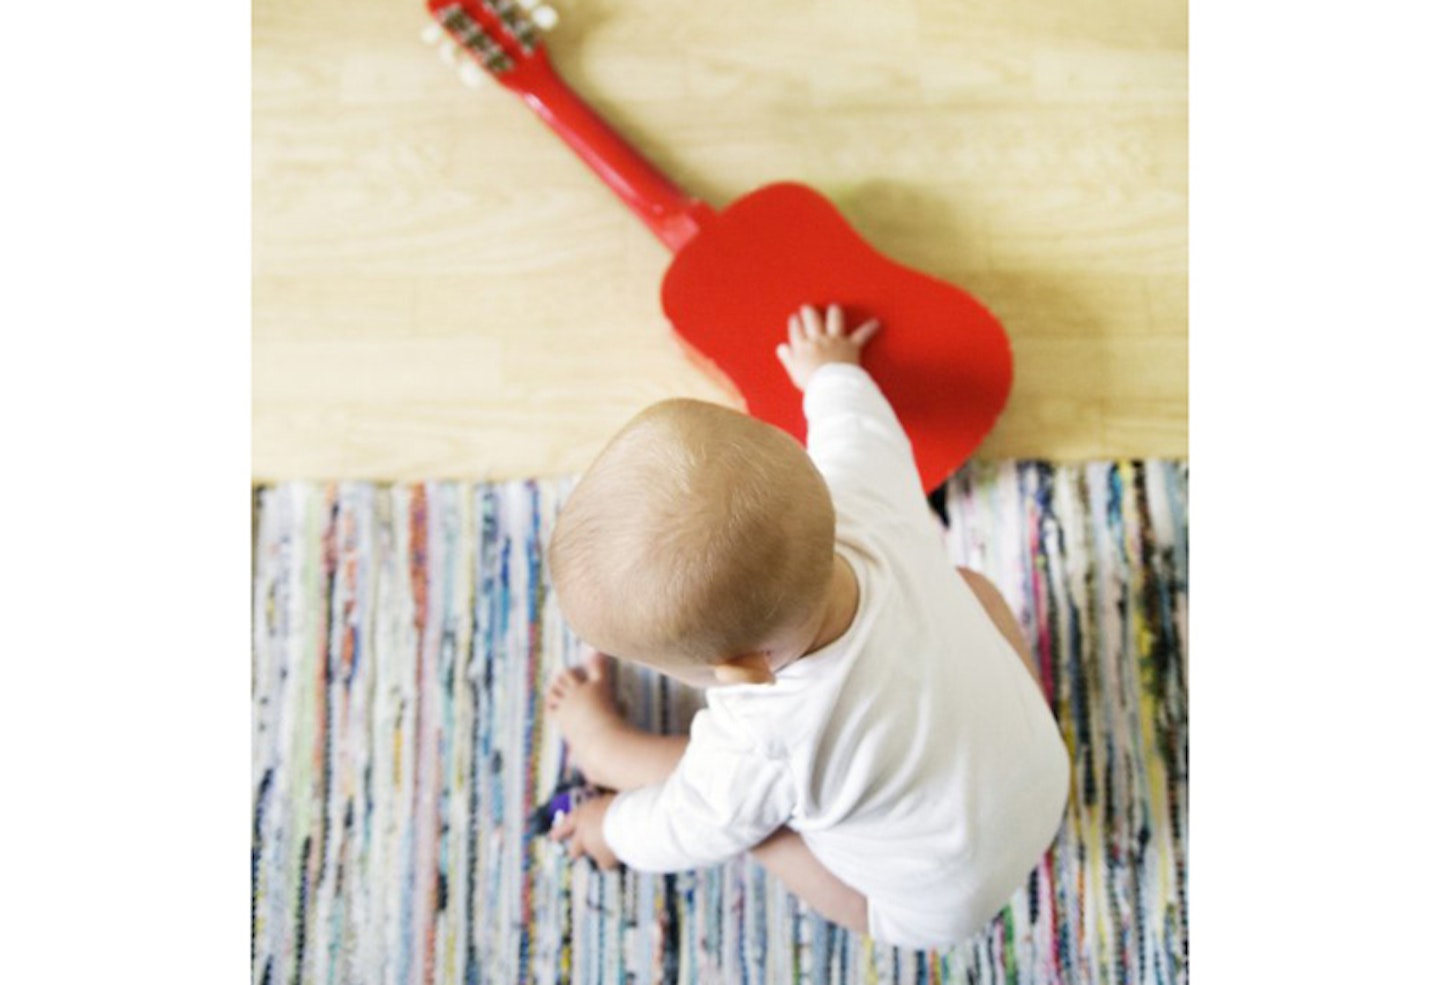 8 Of The Best Names To Choose If You Want Your Baby To Be… A Rock Star